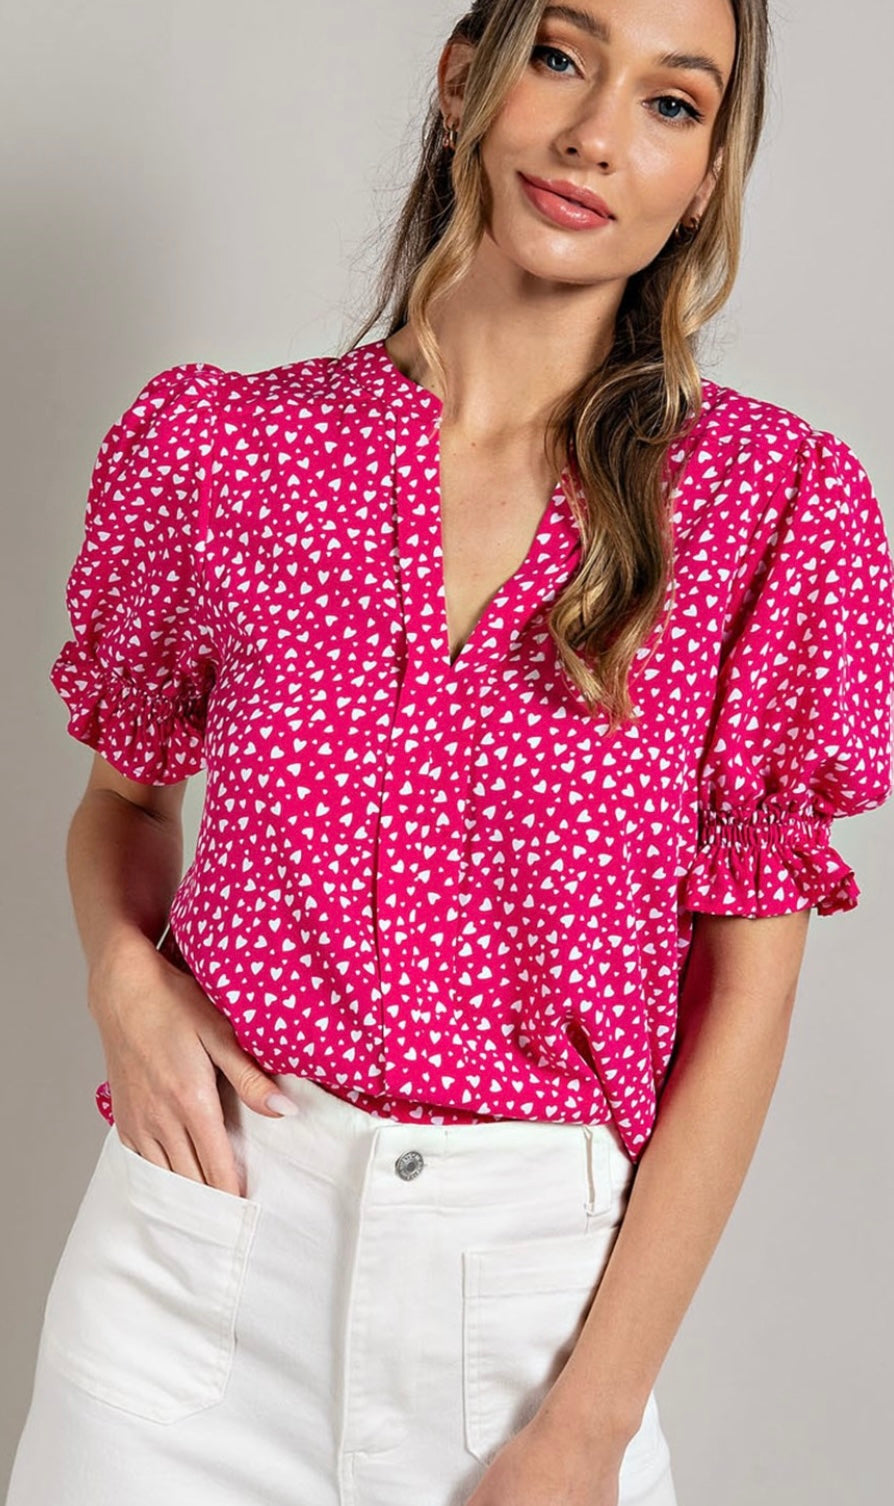 Eesome Hot Pink Top with Hearts